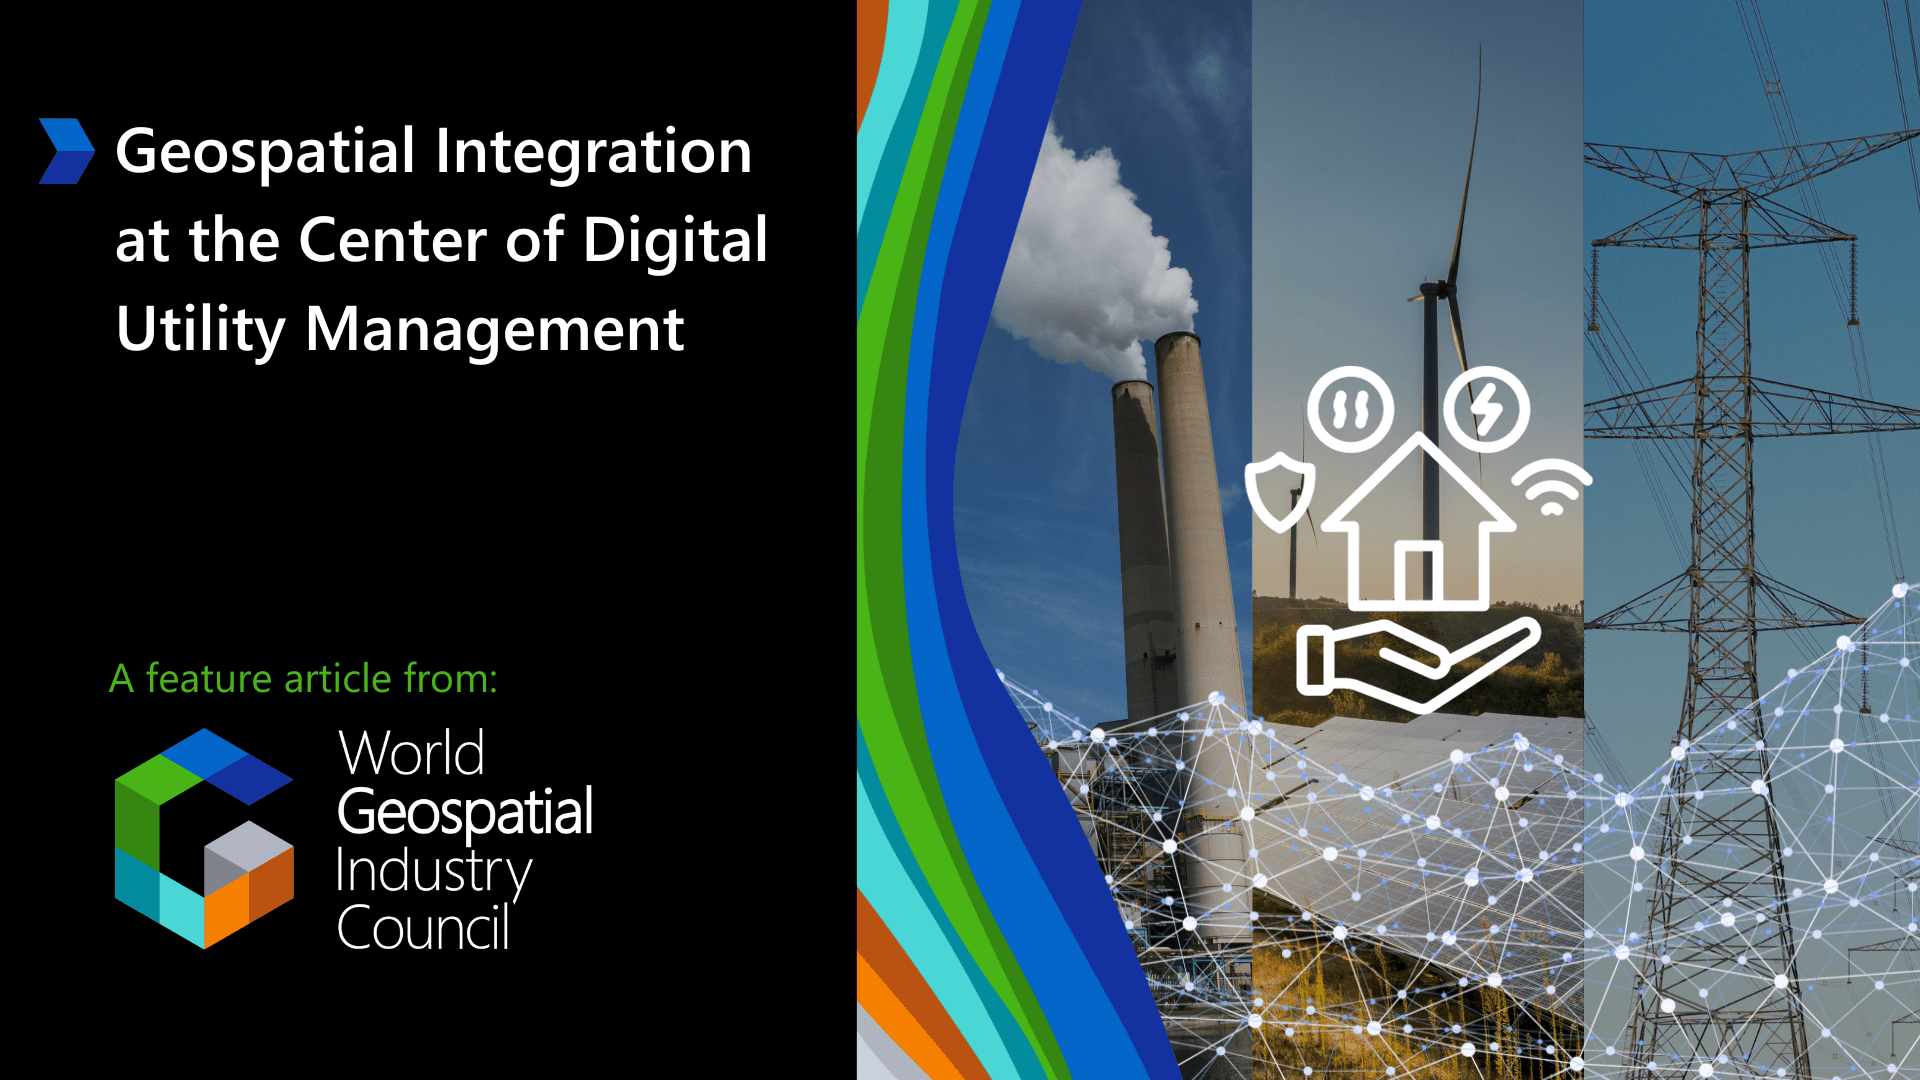 Geospatial data and technology at the backbone of the digital transformation of power utilities.